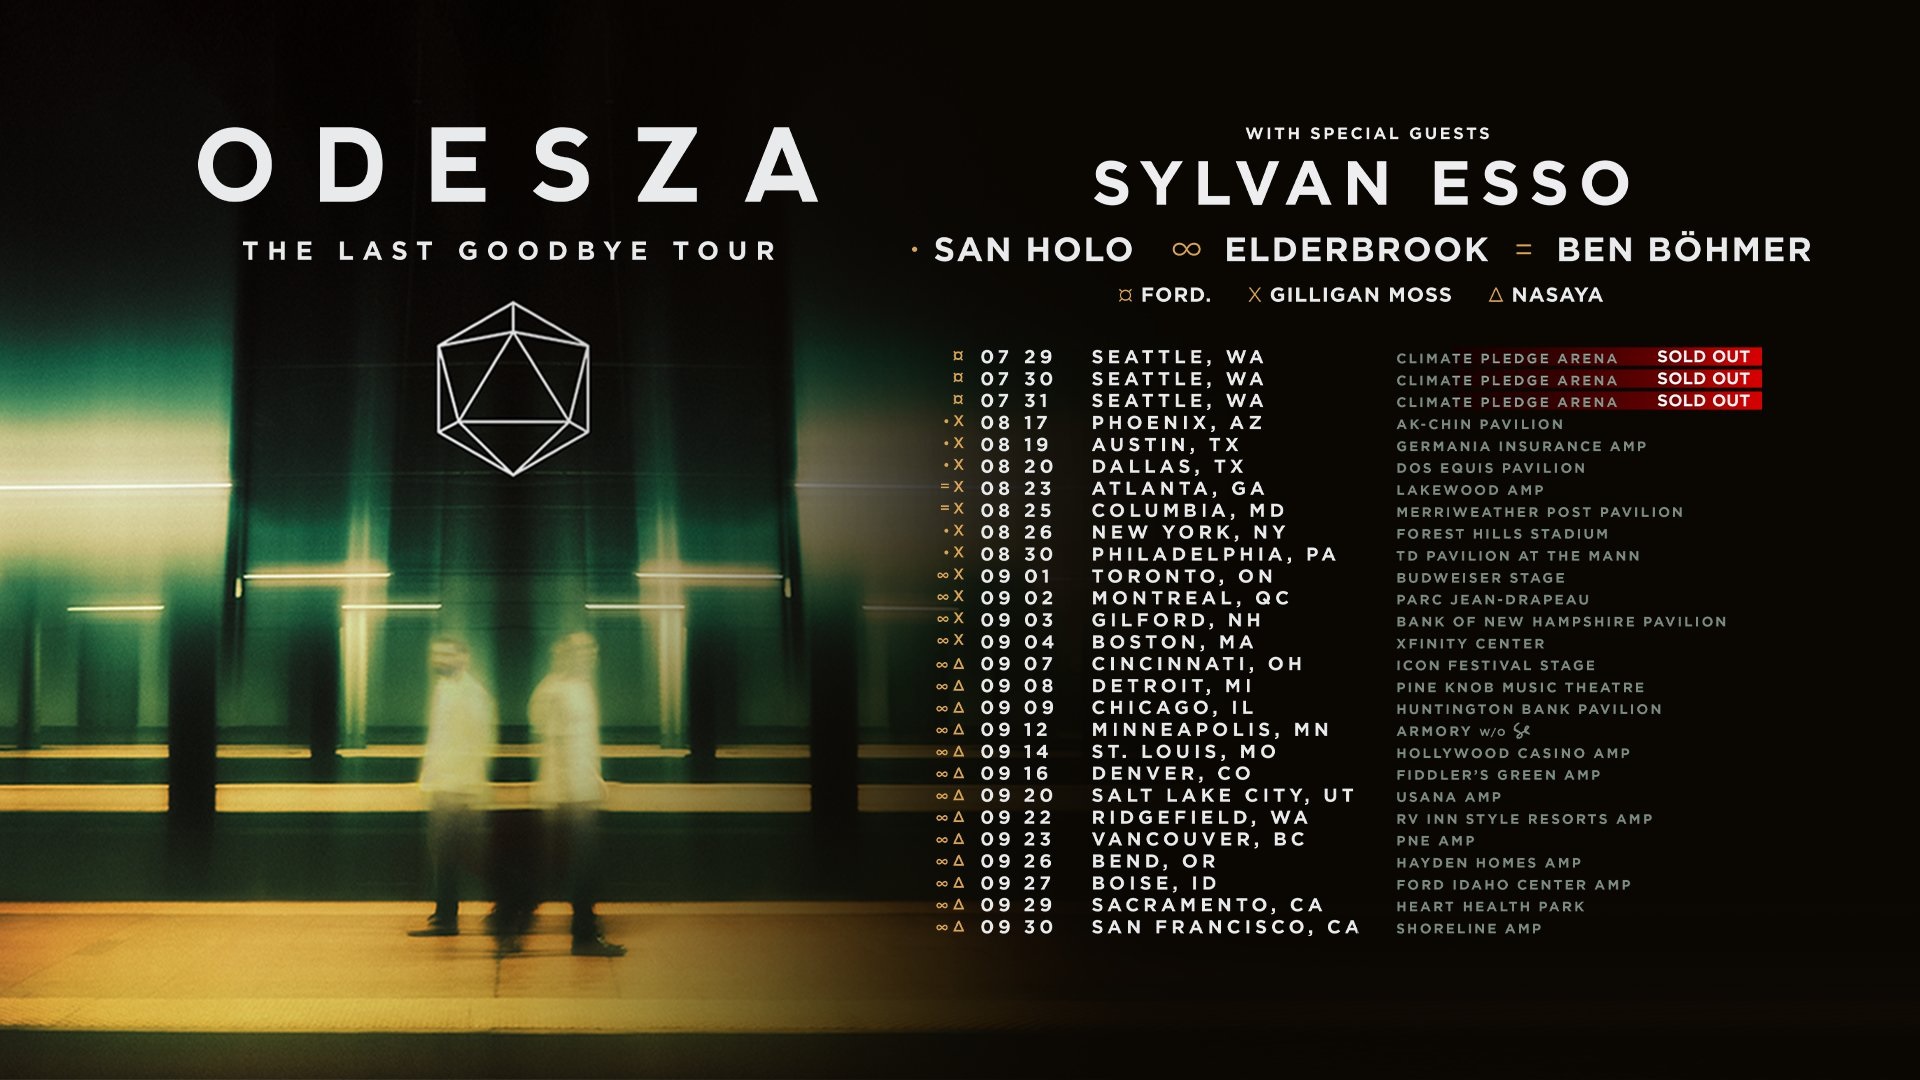 ODESZA The Last Goodbye Tour at Forest Hills Stadium on Fri, Aug 26th